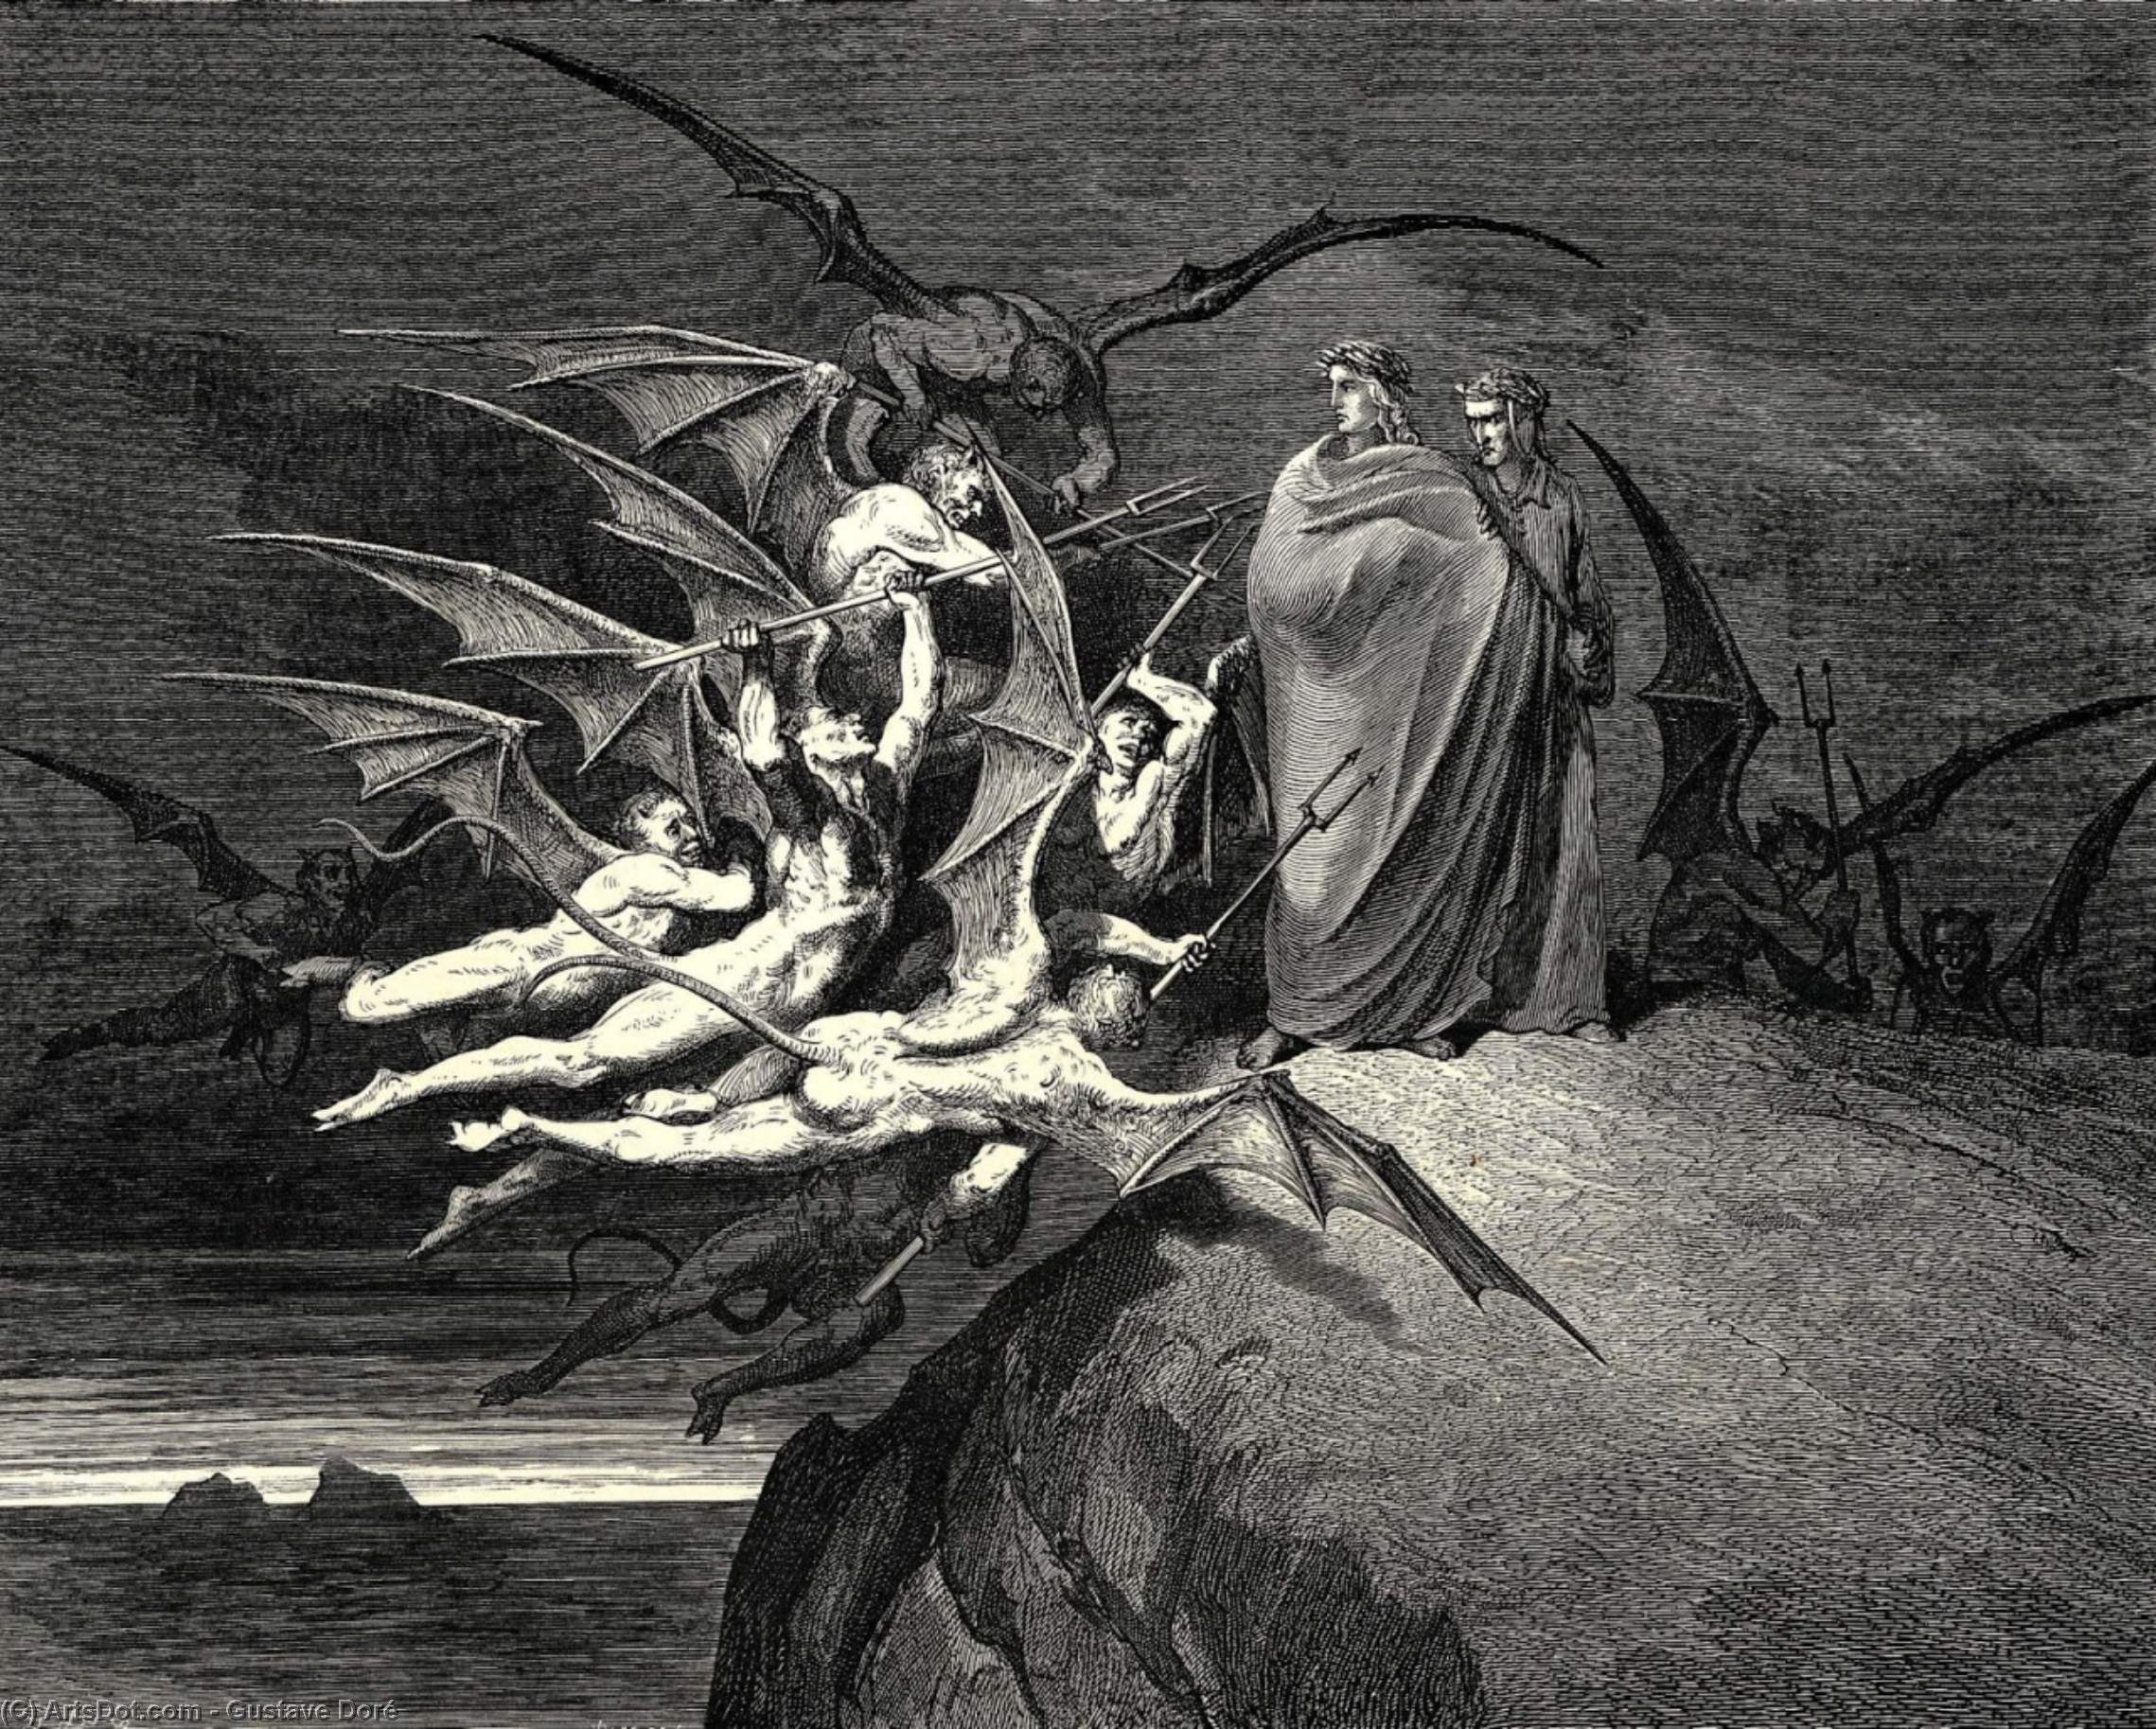 WikiOO.org - 백과 사전 - 회화, 삽화 Paul Gustave Doré - The Inferno, Canto 21, line 70. “Be none of you outrageous.”